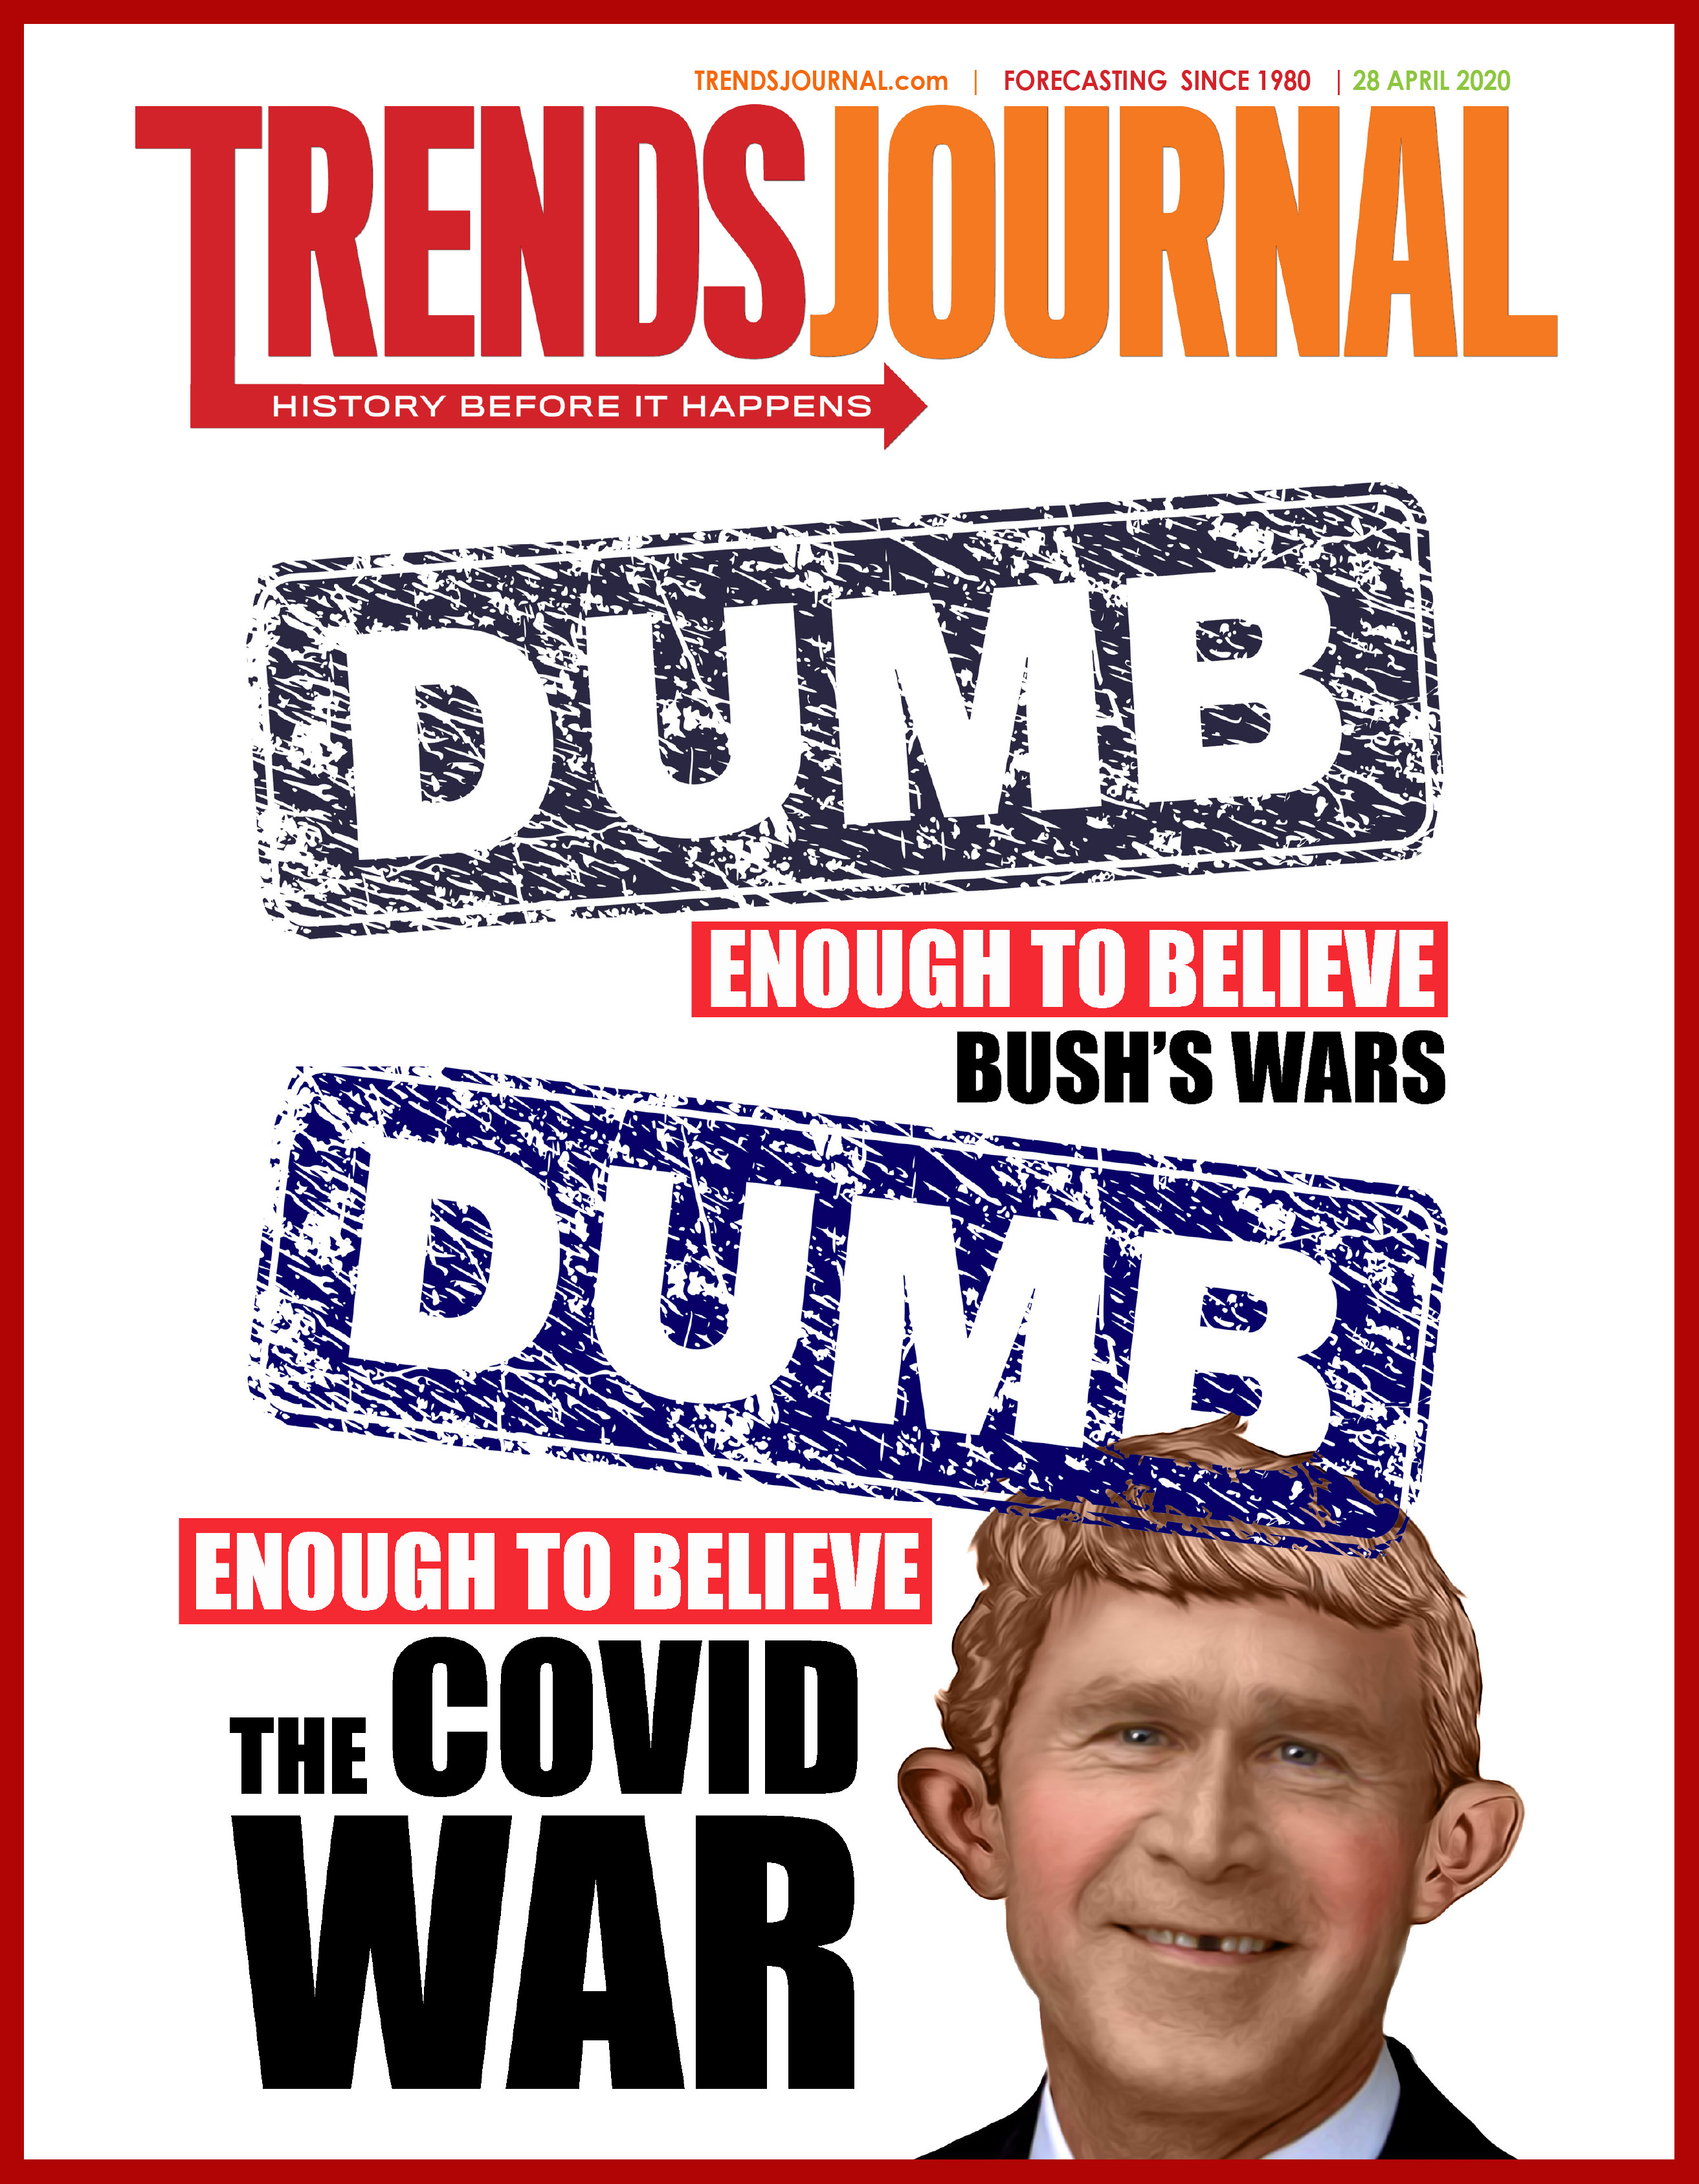 Gerald Celente on Twitter: "Dumb enough to believe Bush's Wars Dumb enough  to believe the COVID WAR. SUBSCRIBE - over 60 pages weekly, full of info &  facts! https://t.co/V7YJKzLMfF #trends2020 #geraldcelente #trendsjournal #